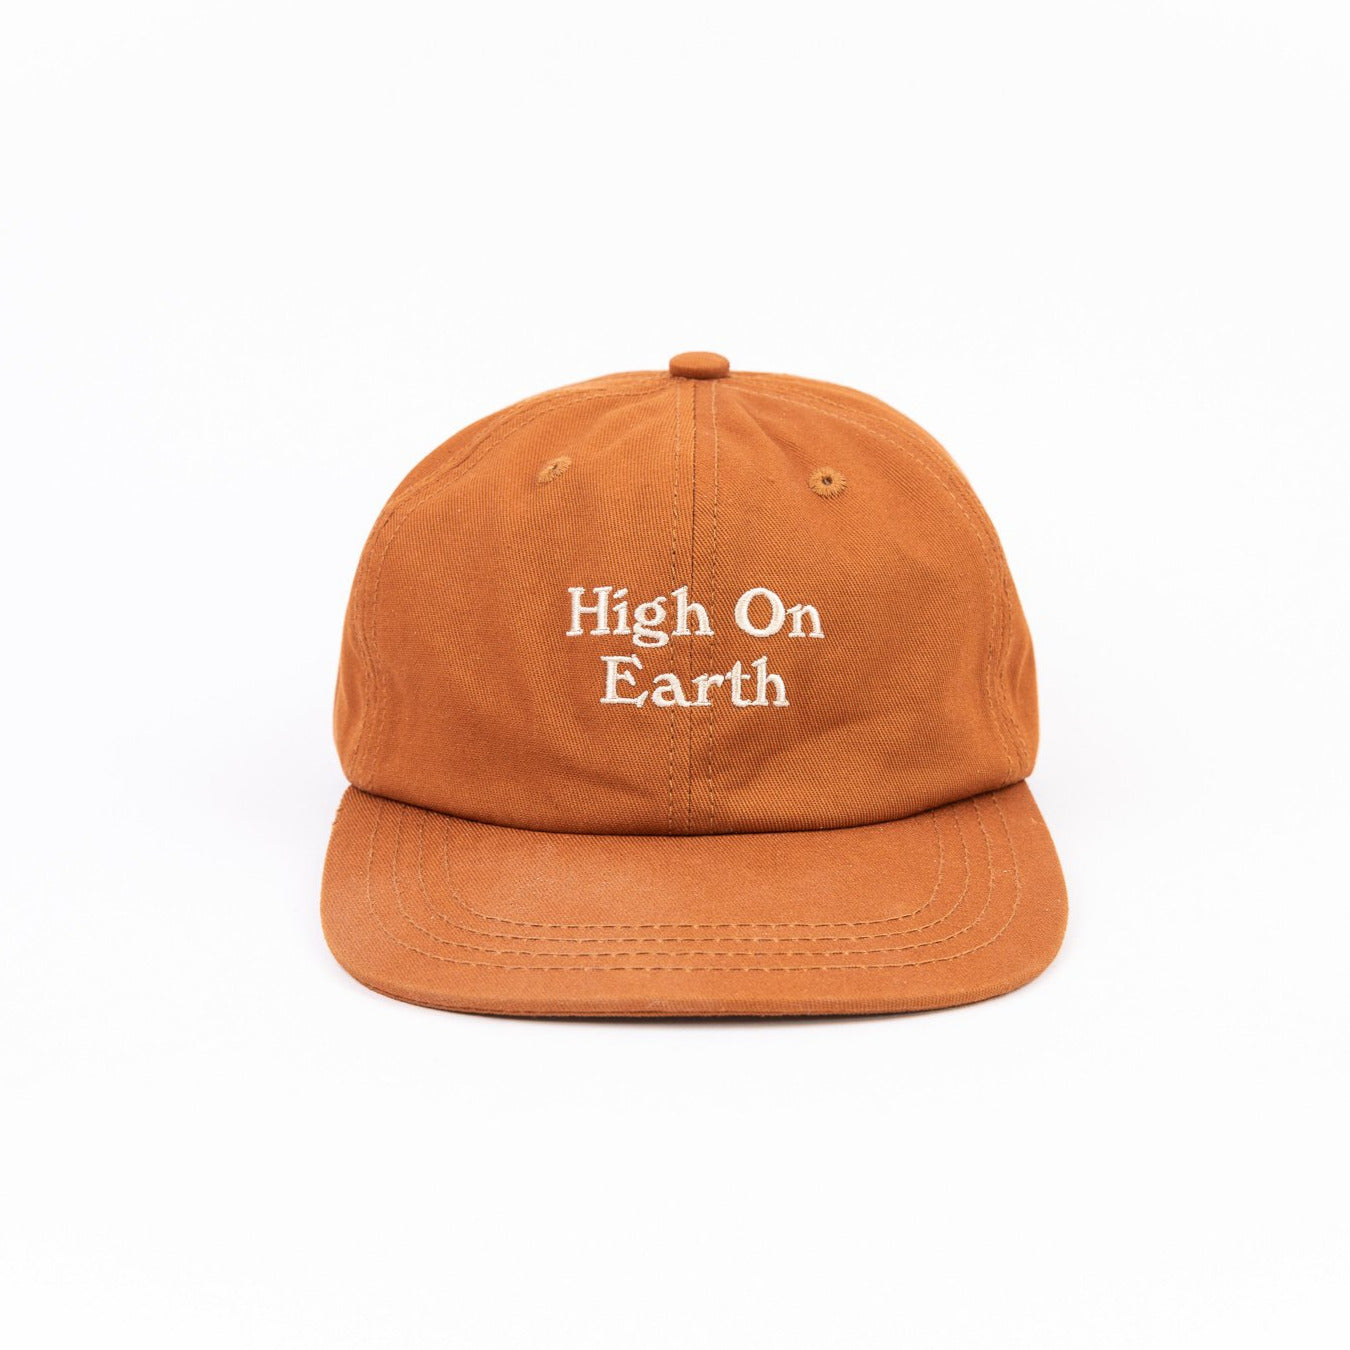 High On Earth hat